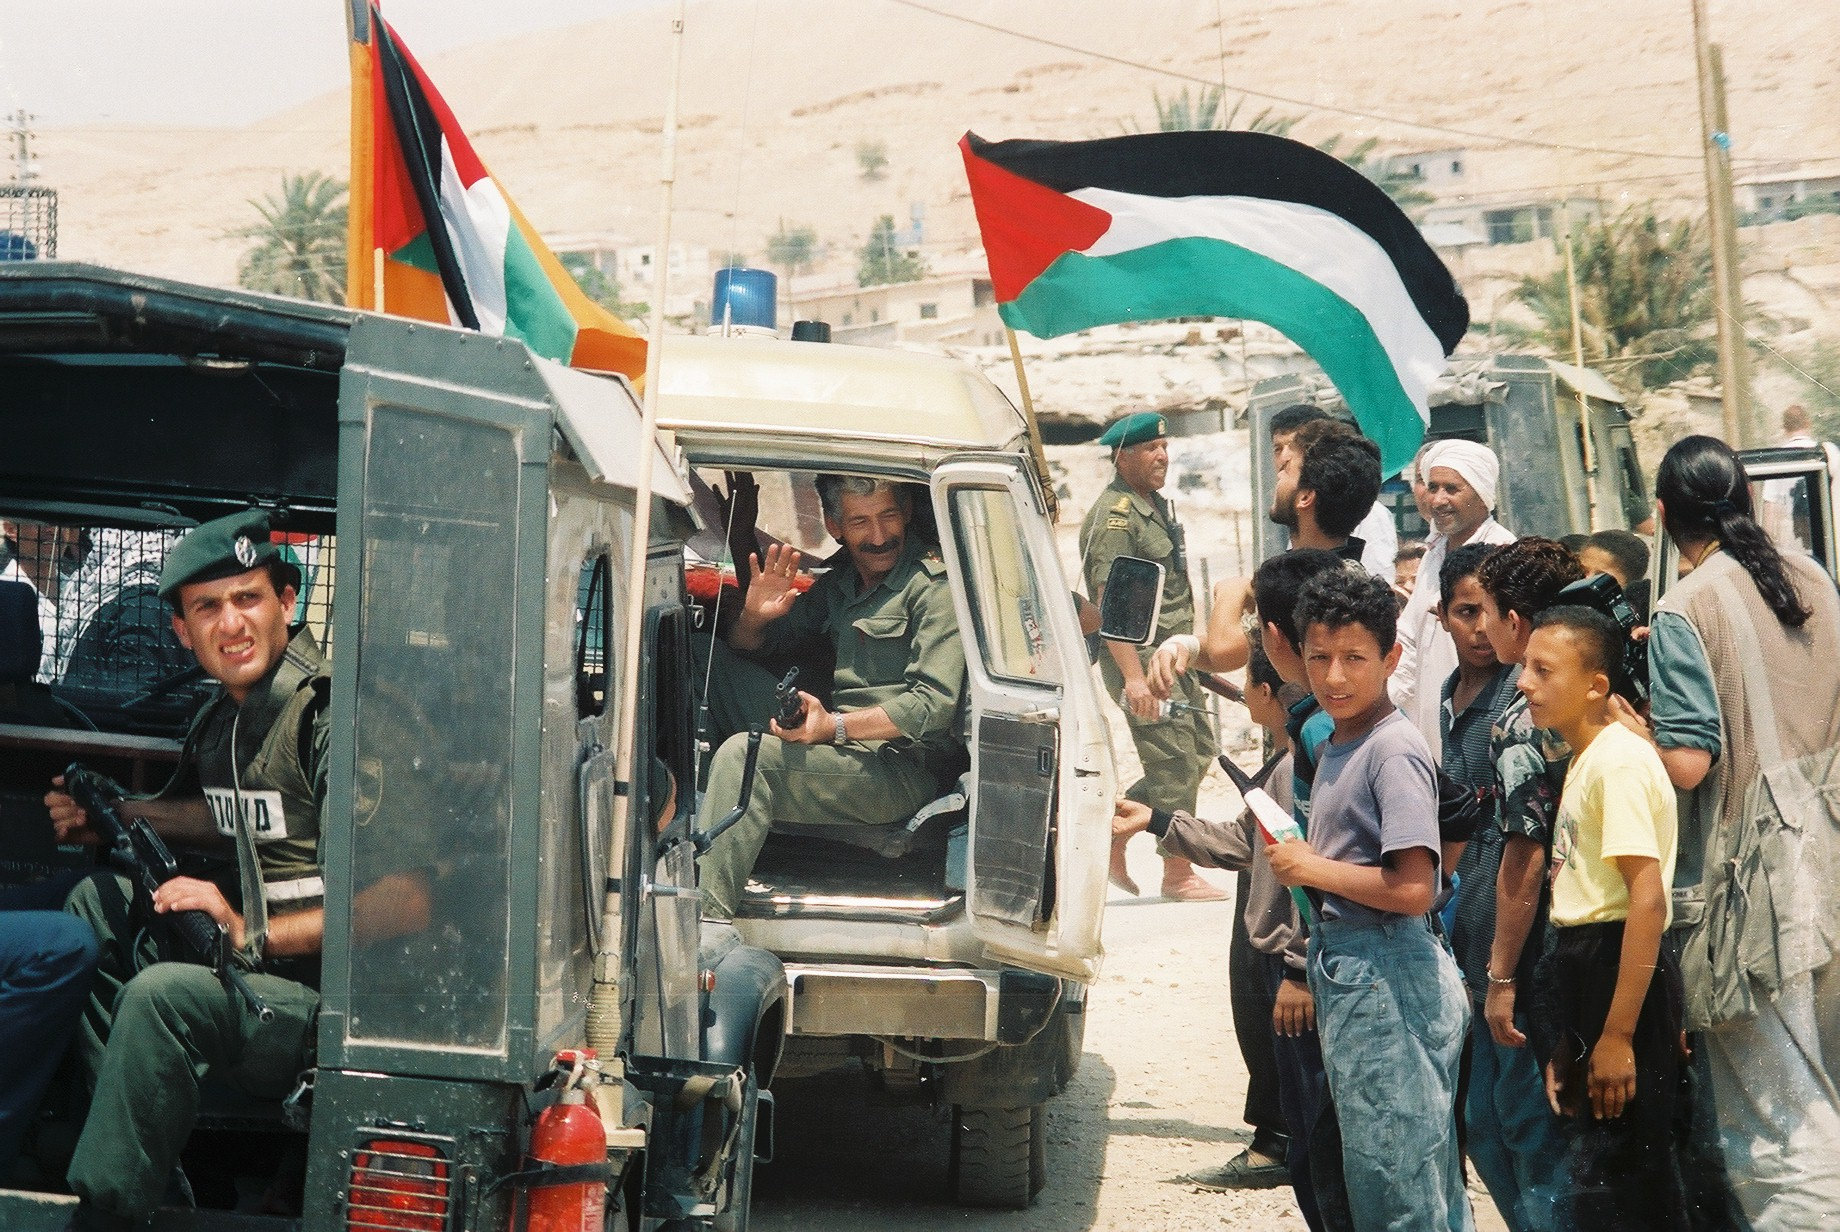 Palestinians celebrate the entrance of Palestinian police officers into Jericho, May 13, 1994. Jericho was one of the first cities in the occupied West Bank handed over to the Palestinian Authority in accordance with the Oslo Accords. (Yossi Zamir/Flash 90)